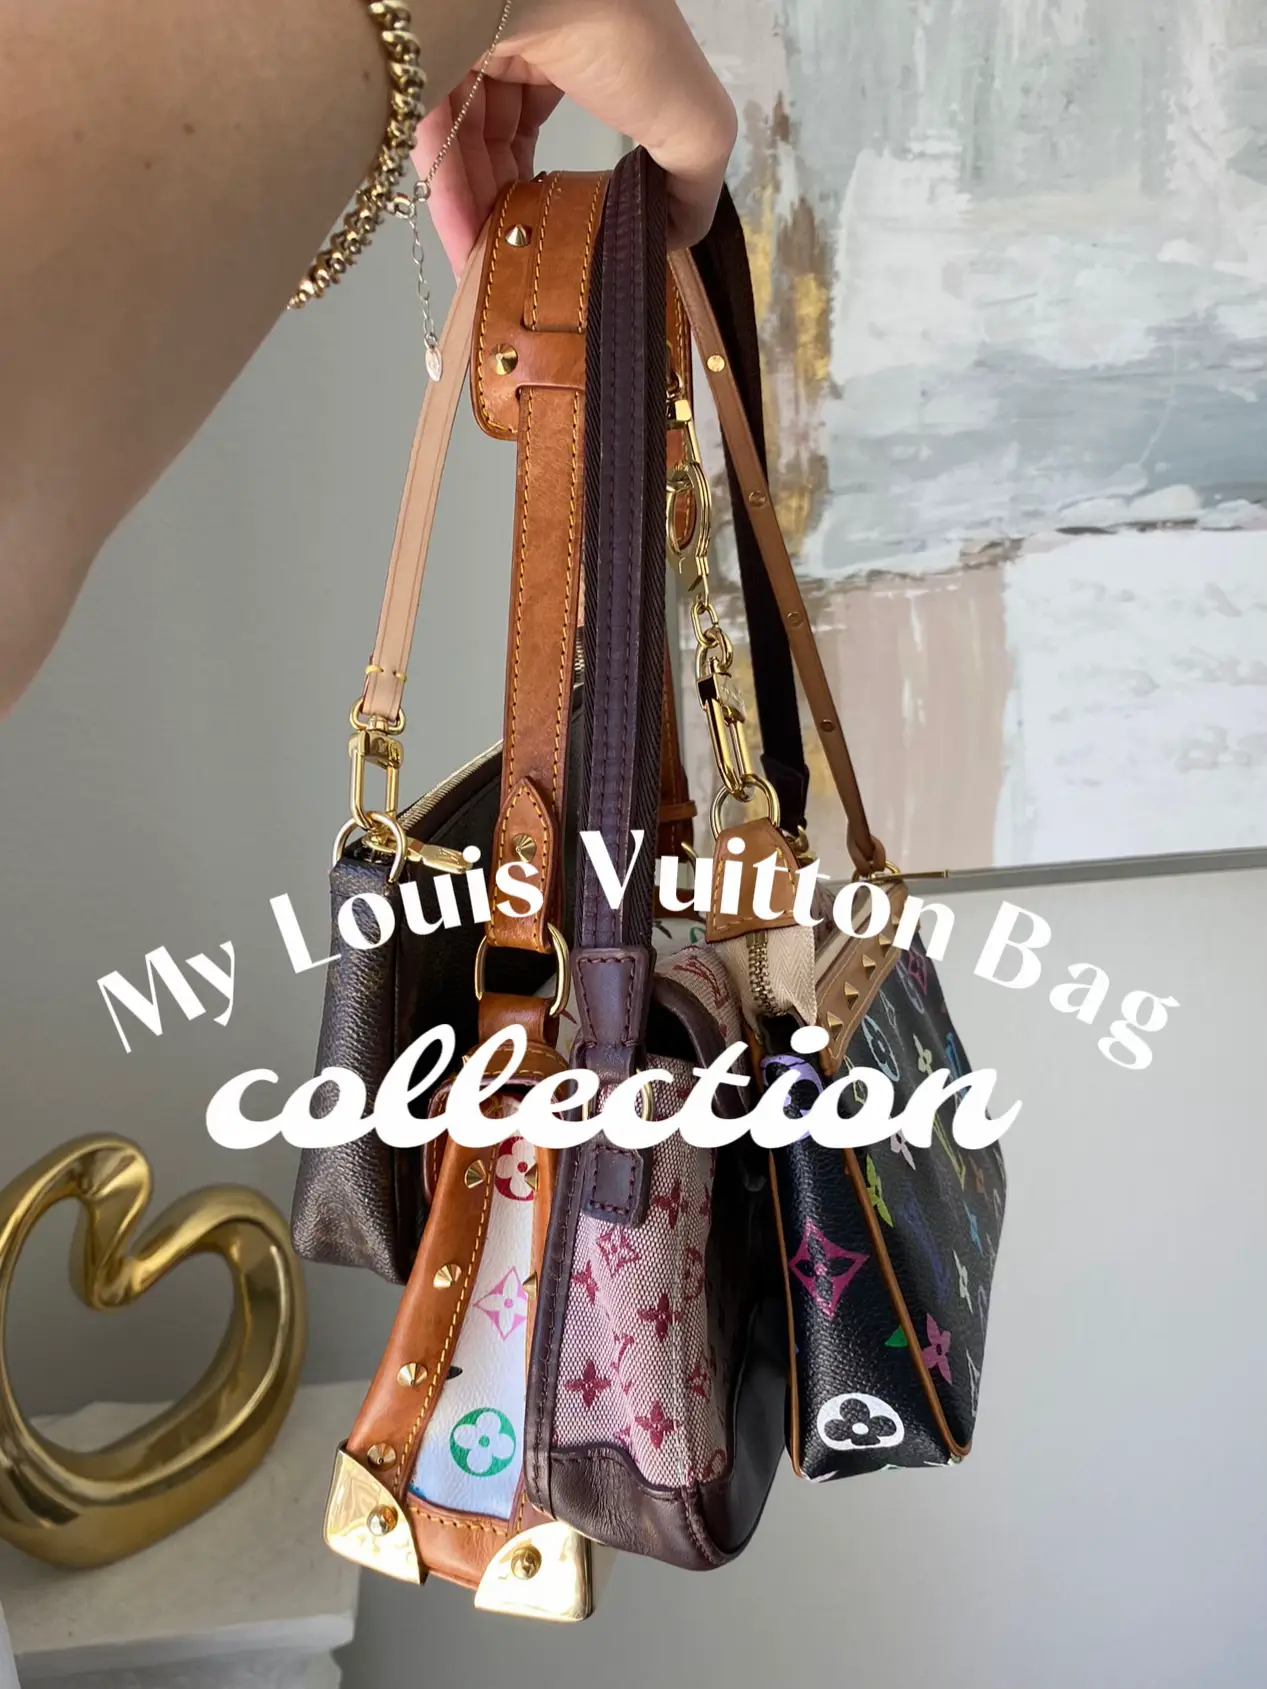 My Louis Vuitton Bag Collection, Gallery posted by Caitlin Eliza